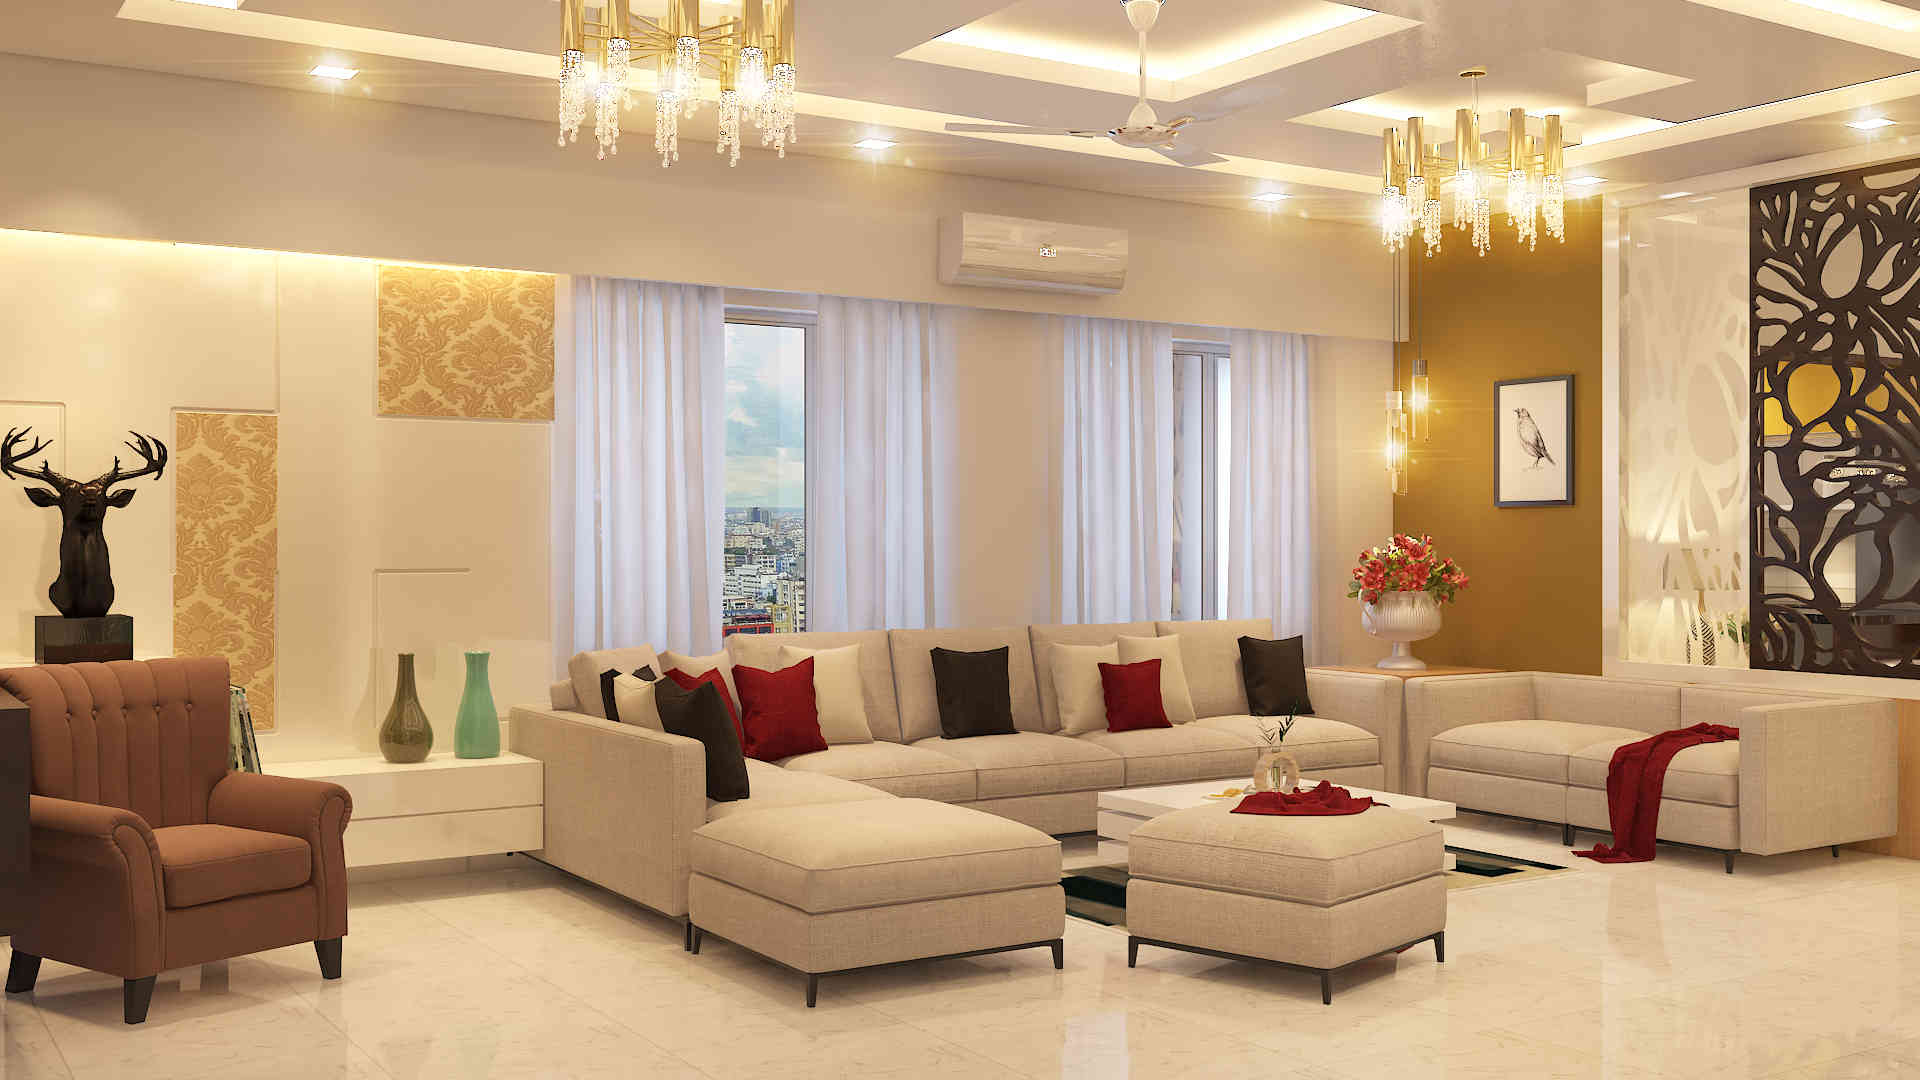 Contemporary Living Room Design With Turquoise U-Shaped Sofa Set And Lights